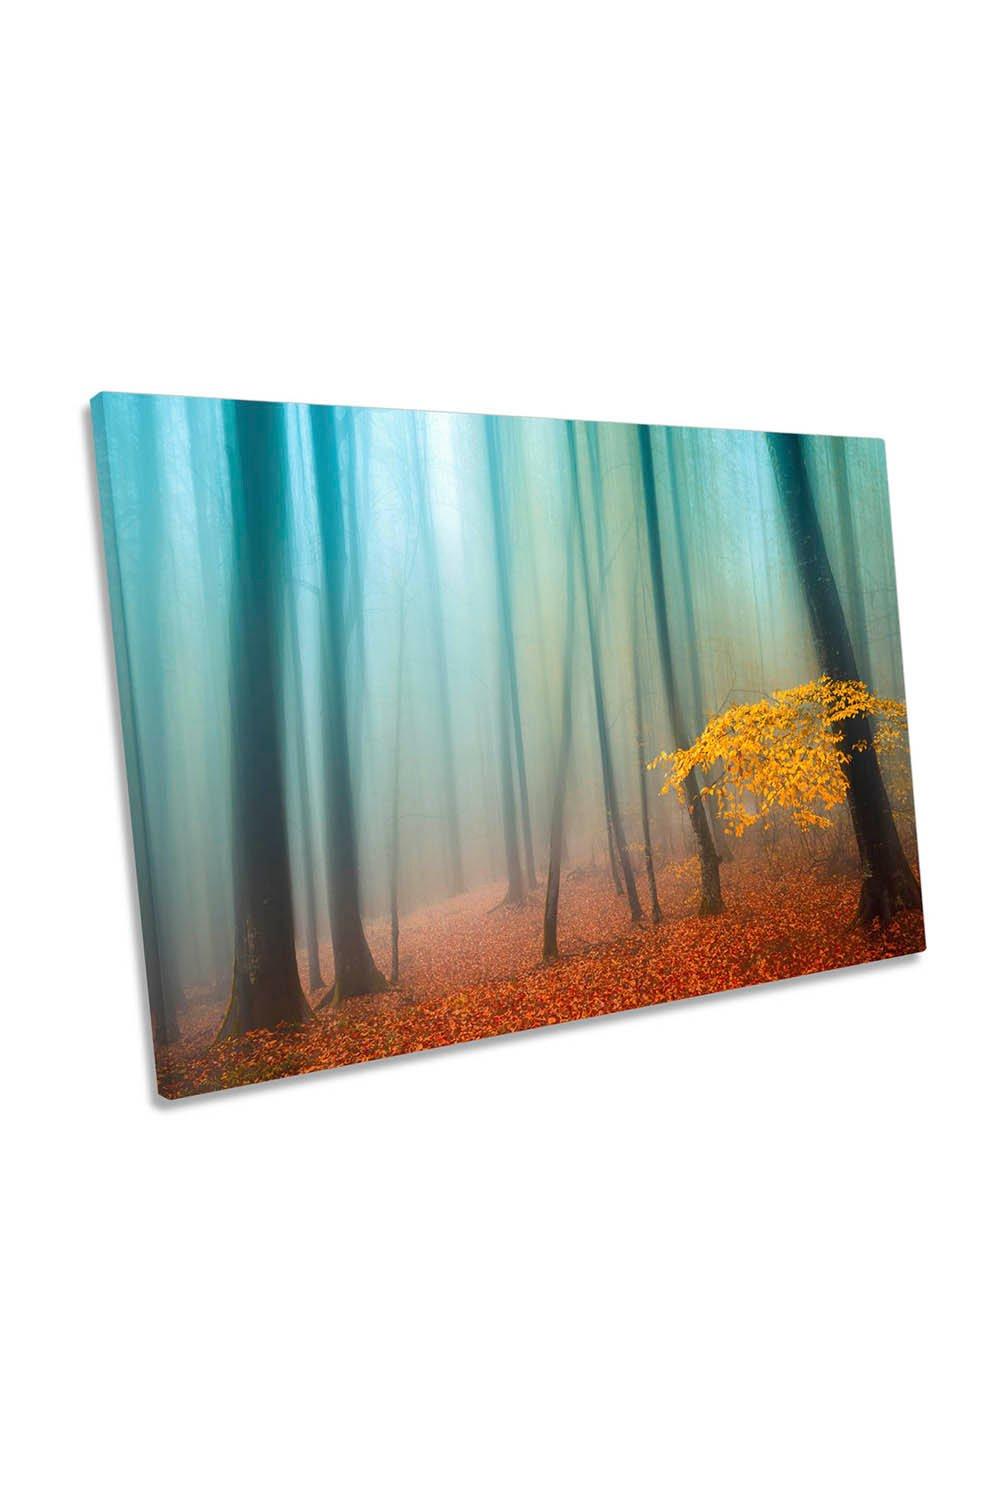 Sense of Silence Forest Misty Yellow Leaves Canvas Wall Art Picture Print